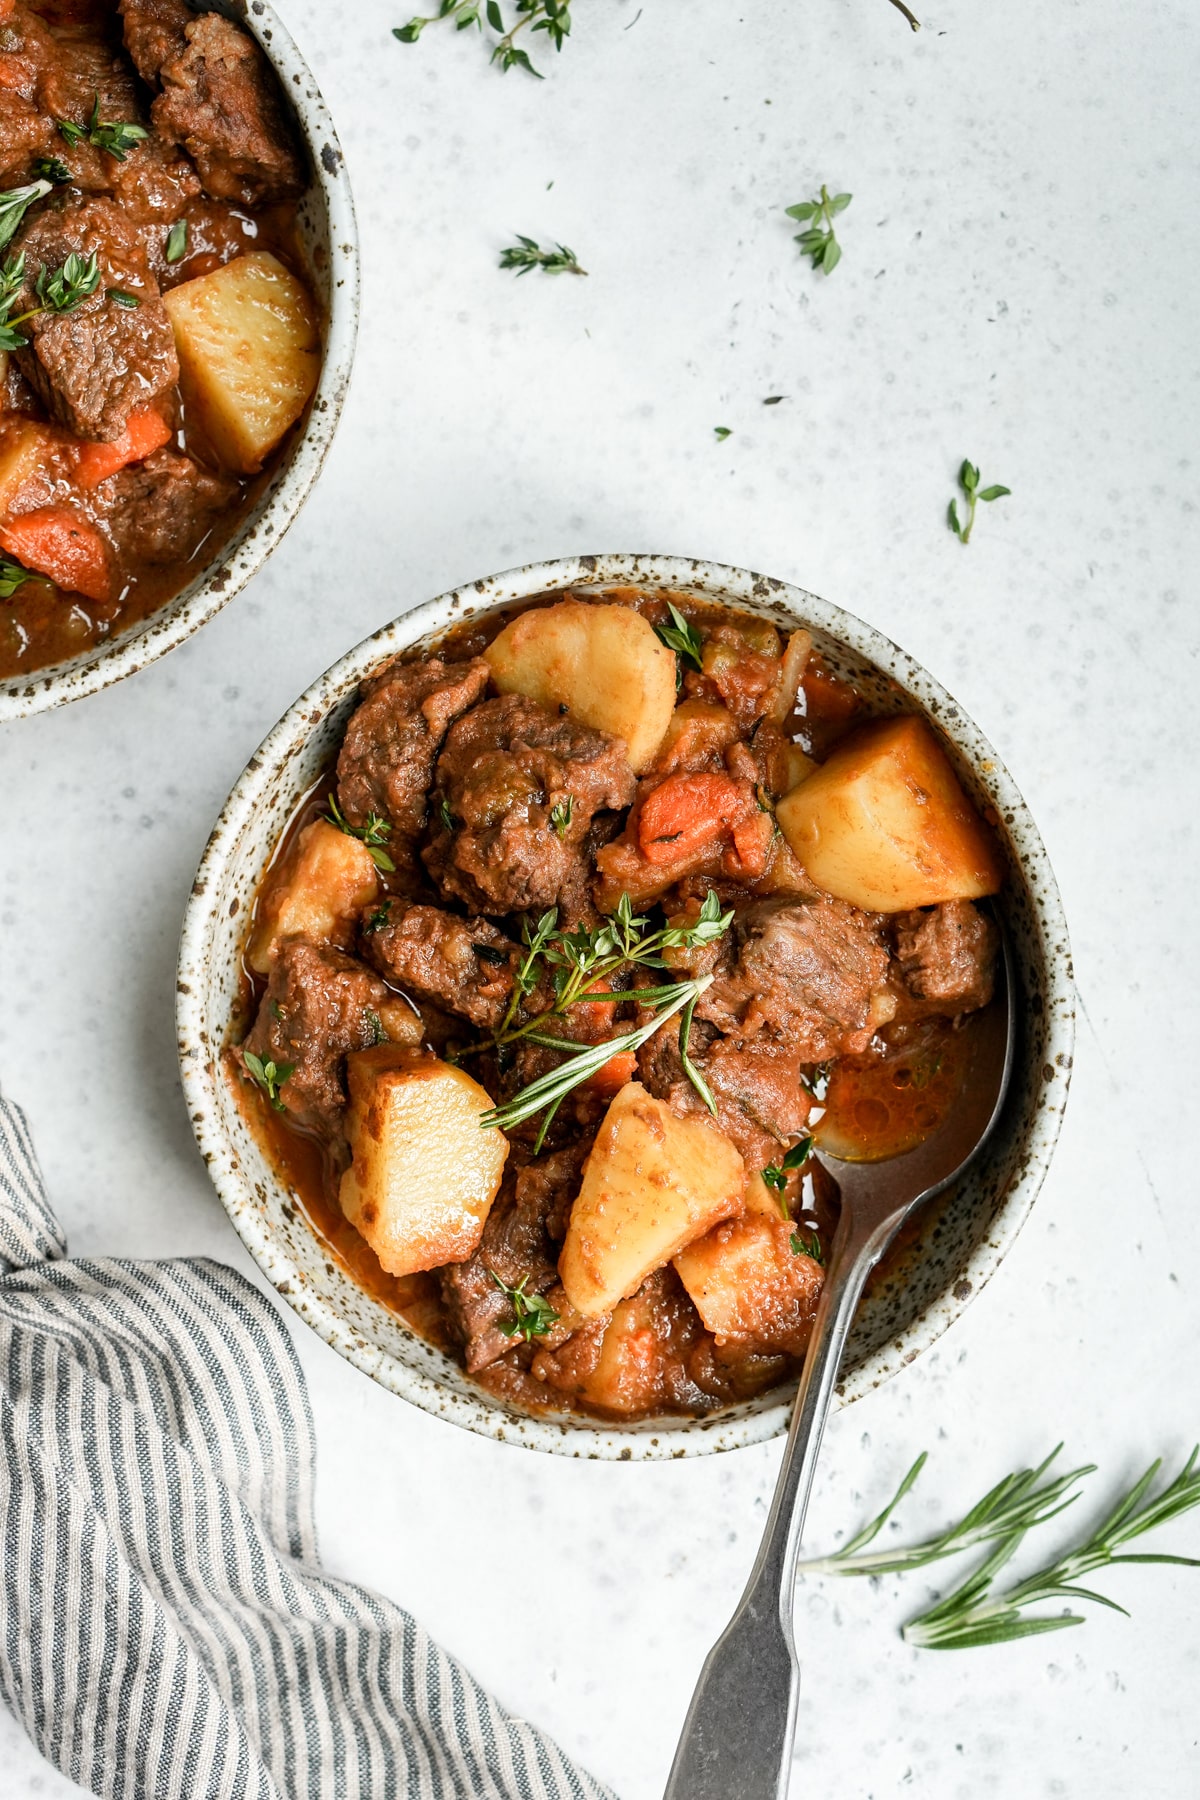 Two bowls of Italian beef stew (spezzatino) with fresh herbs scattered around